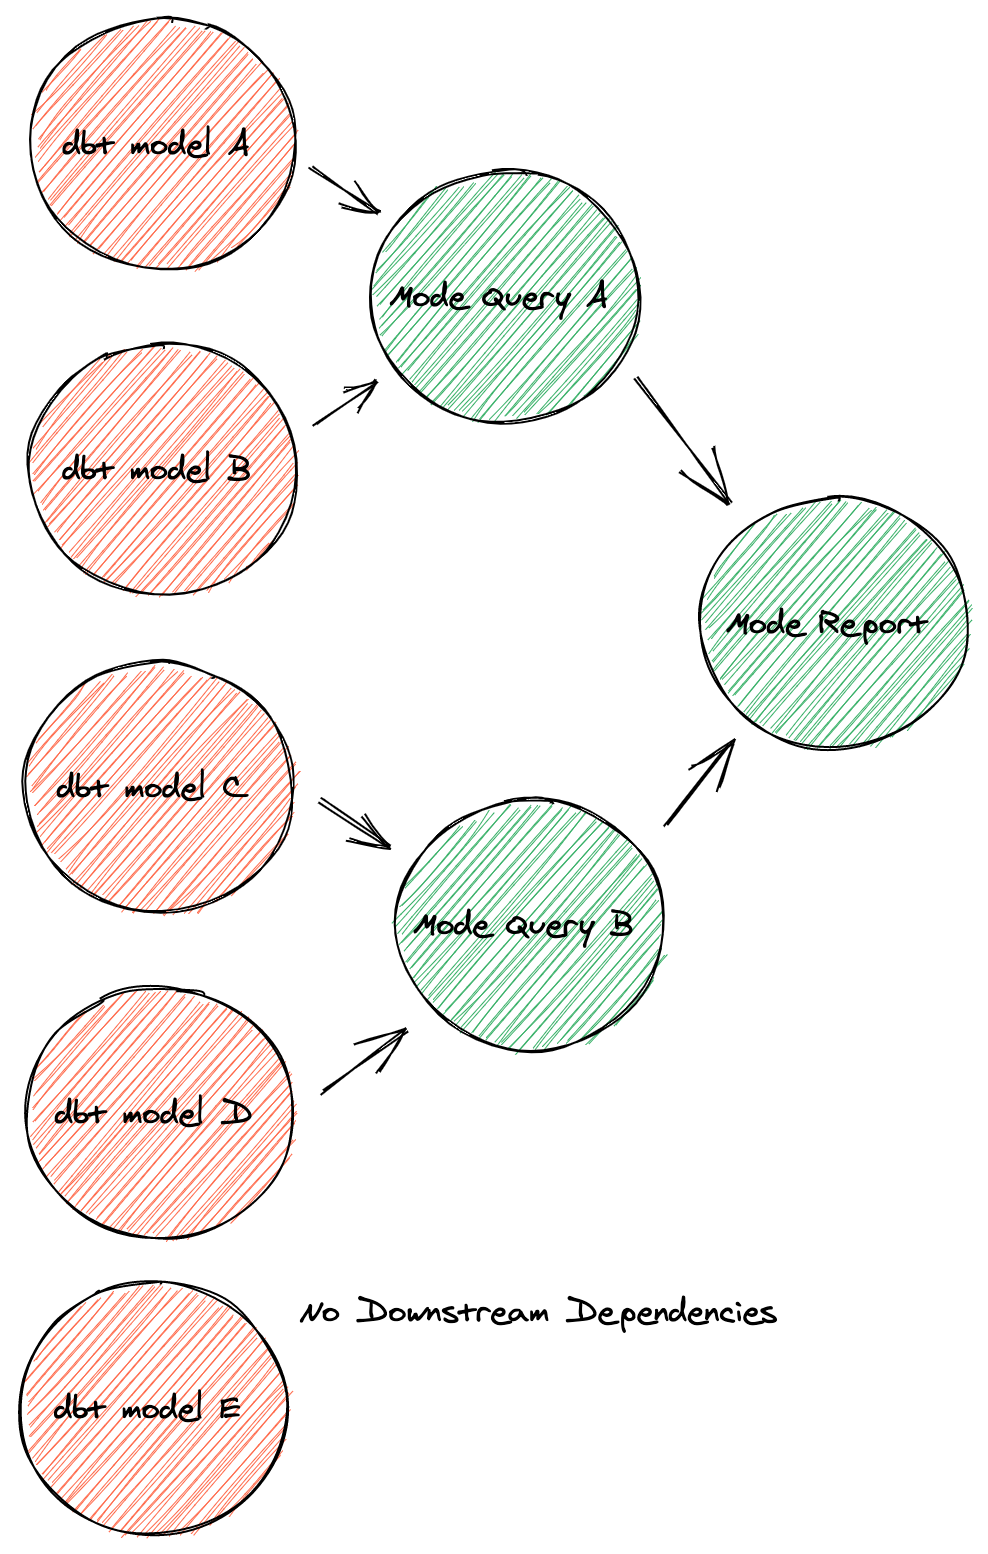 Mode graph augmented with dbt model dependencies.